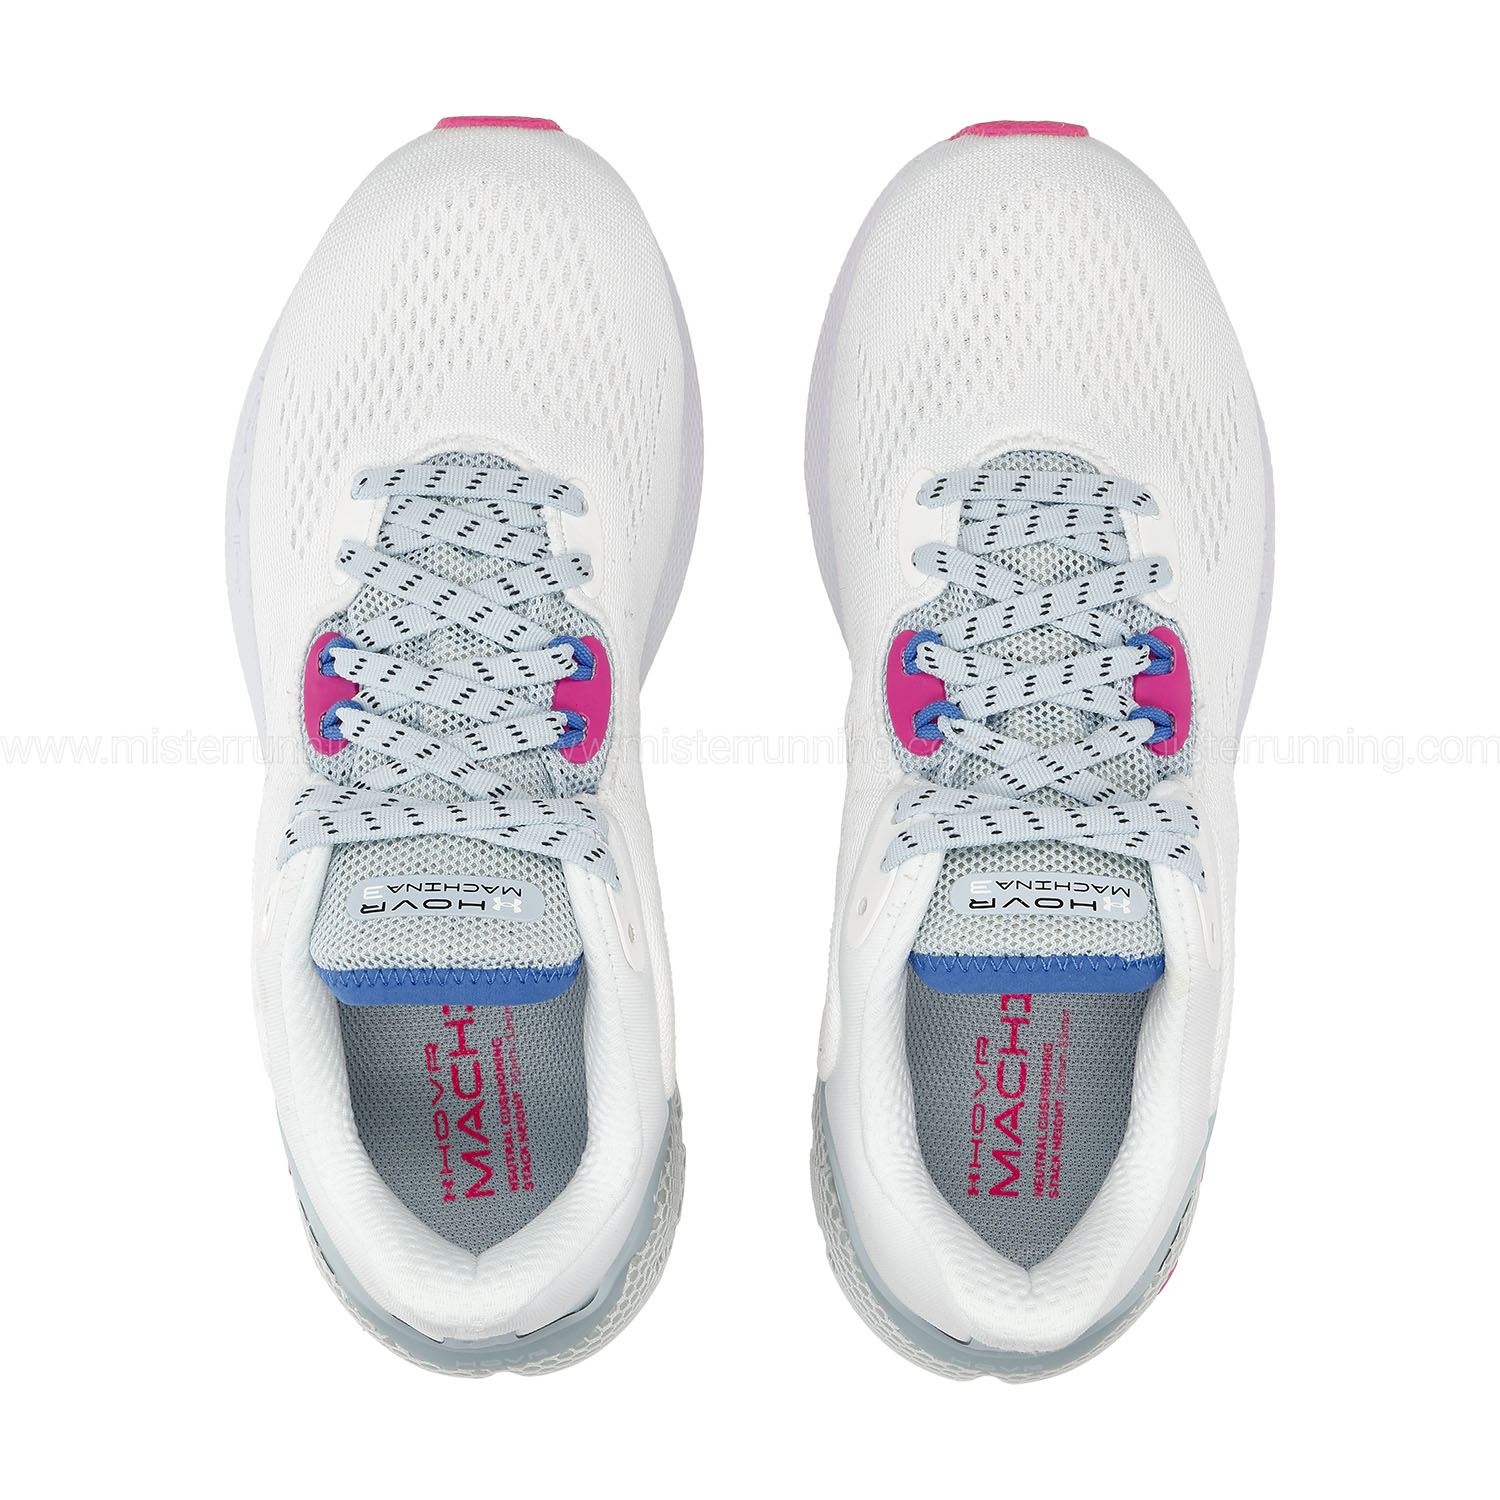 Under Armour HOVR Machina 3 - White/Breaker Blue/Electro Pink